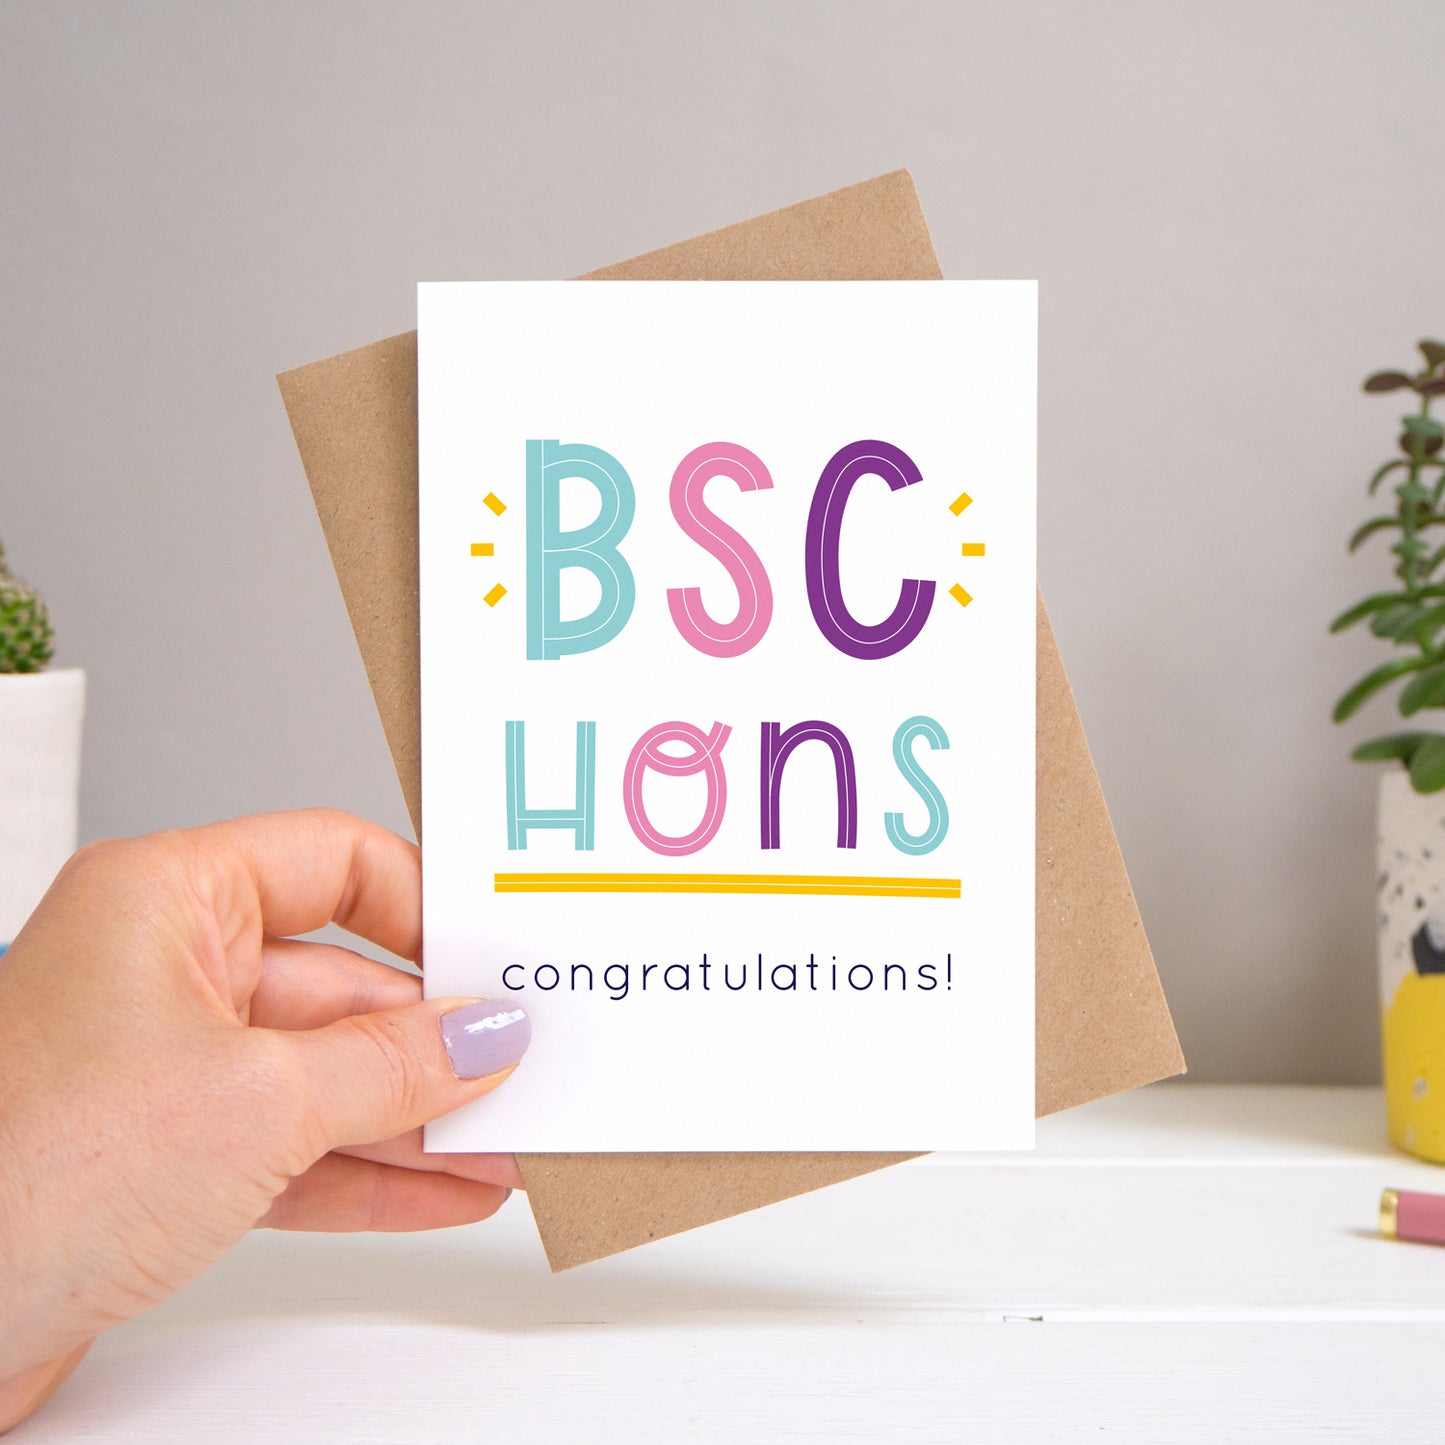 A BSc Hons graduation congratulations card held over a warm grey and white background with potted plants peeping the sides. Behind the card is a kraft brown envelope that comes with the card. The text on this version of the card is in varying tones of navy and pink, purple and  blue.